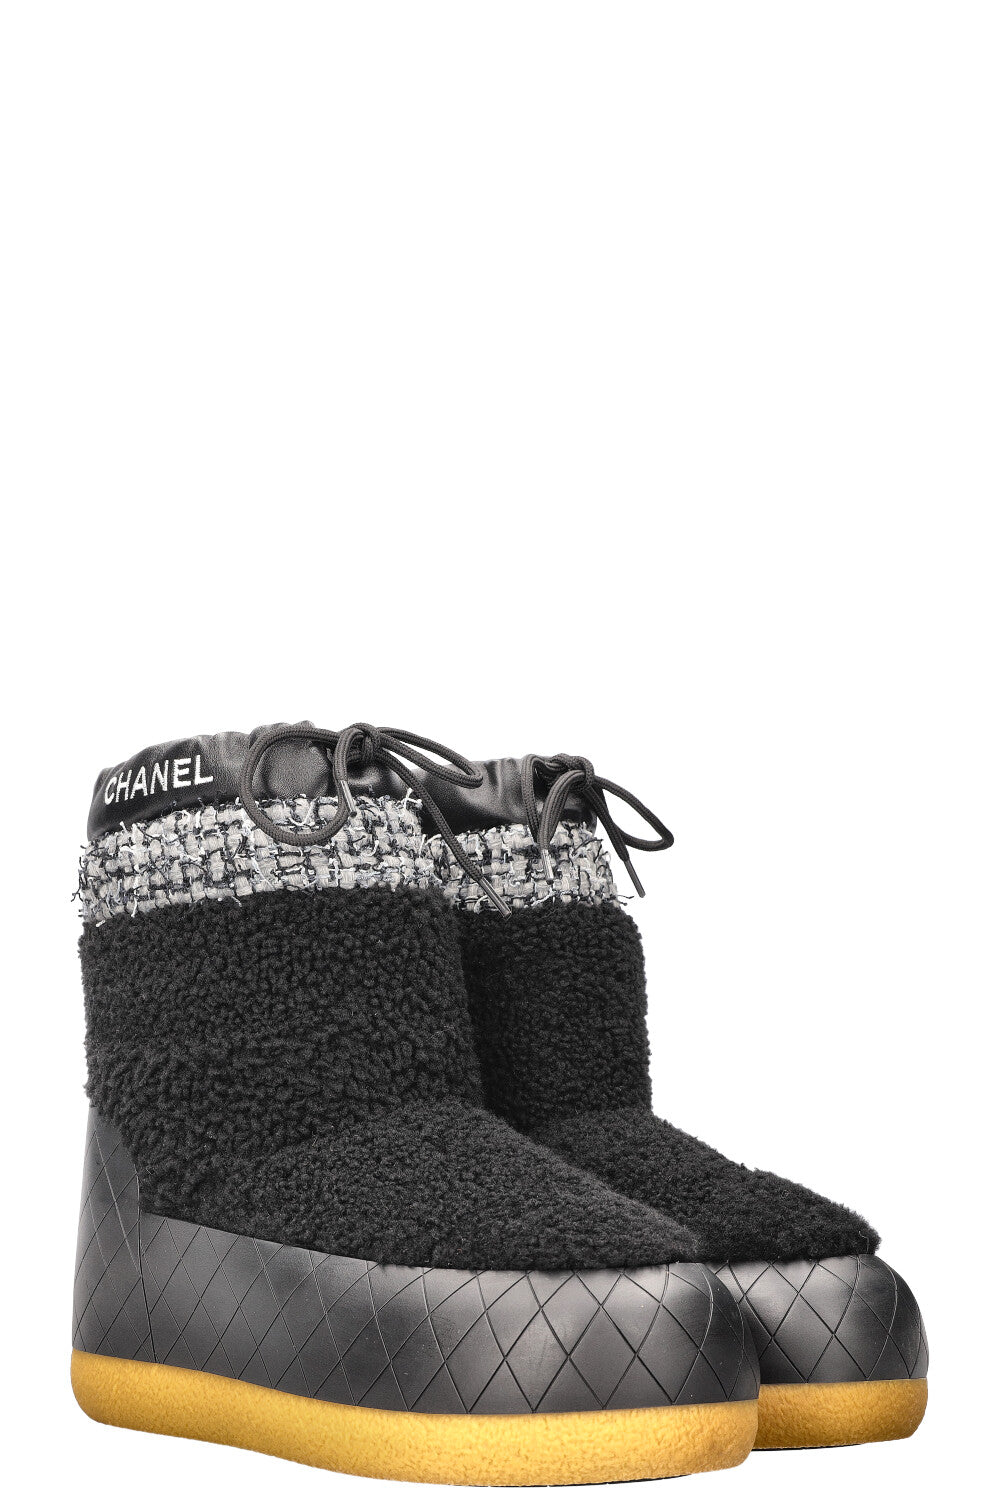 CHANEL Snow Boots Shearling FW23/24